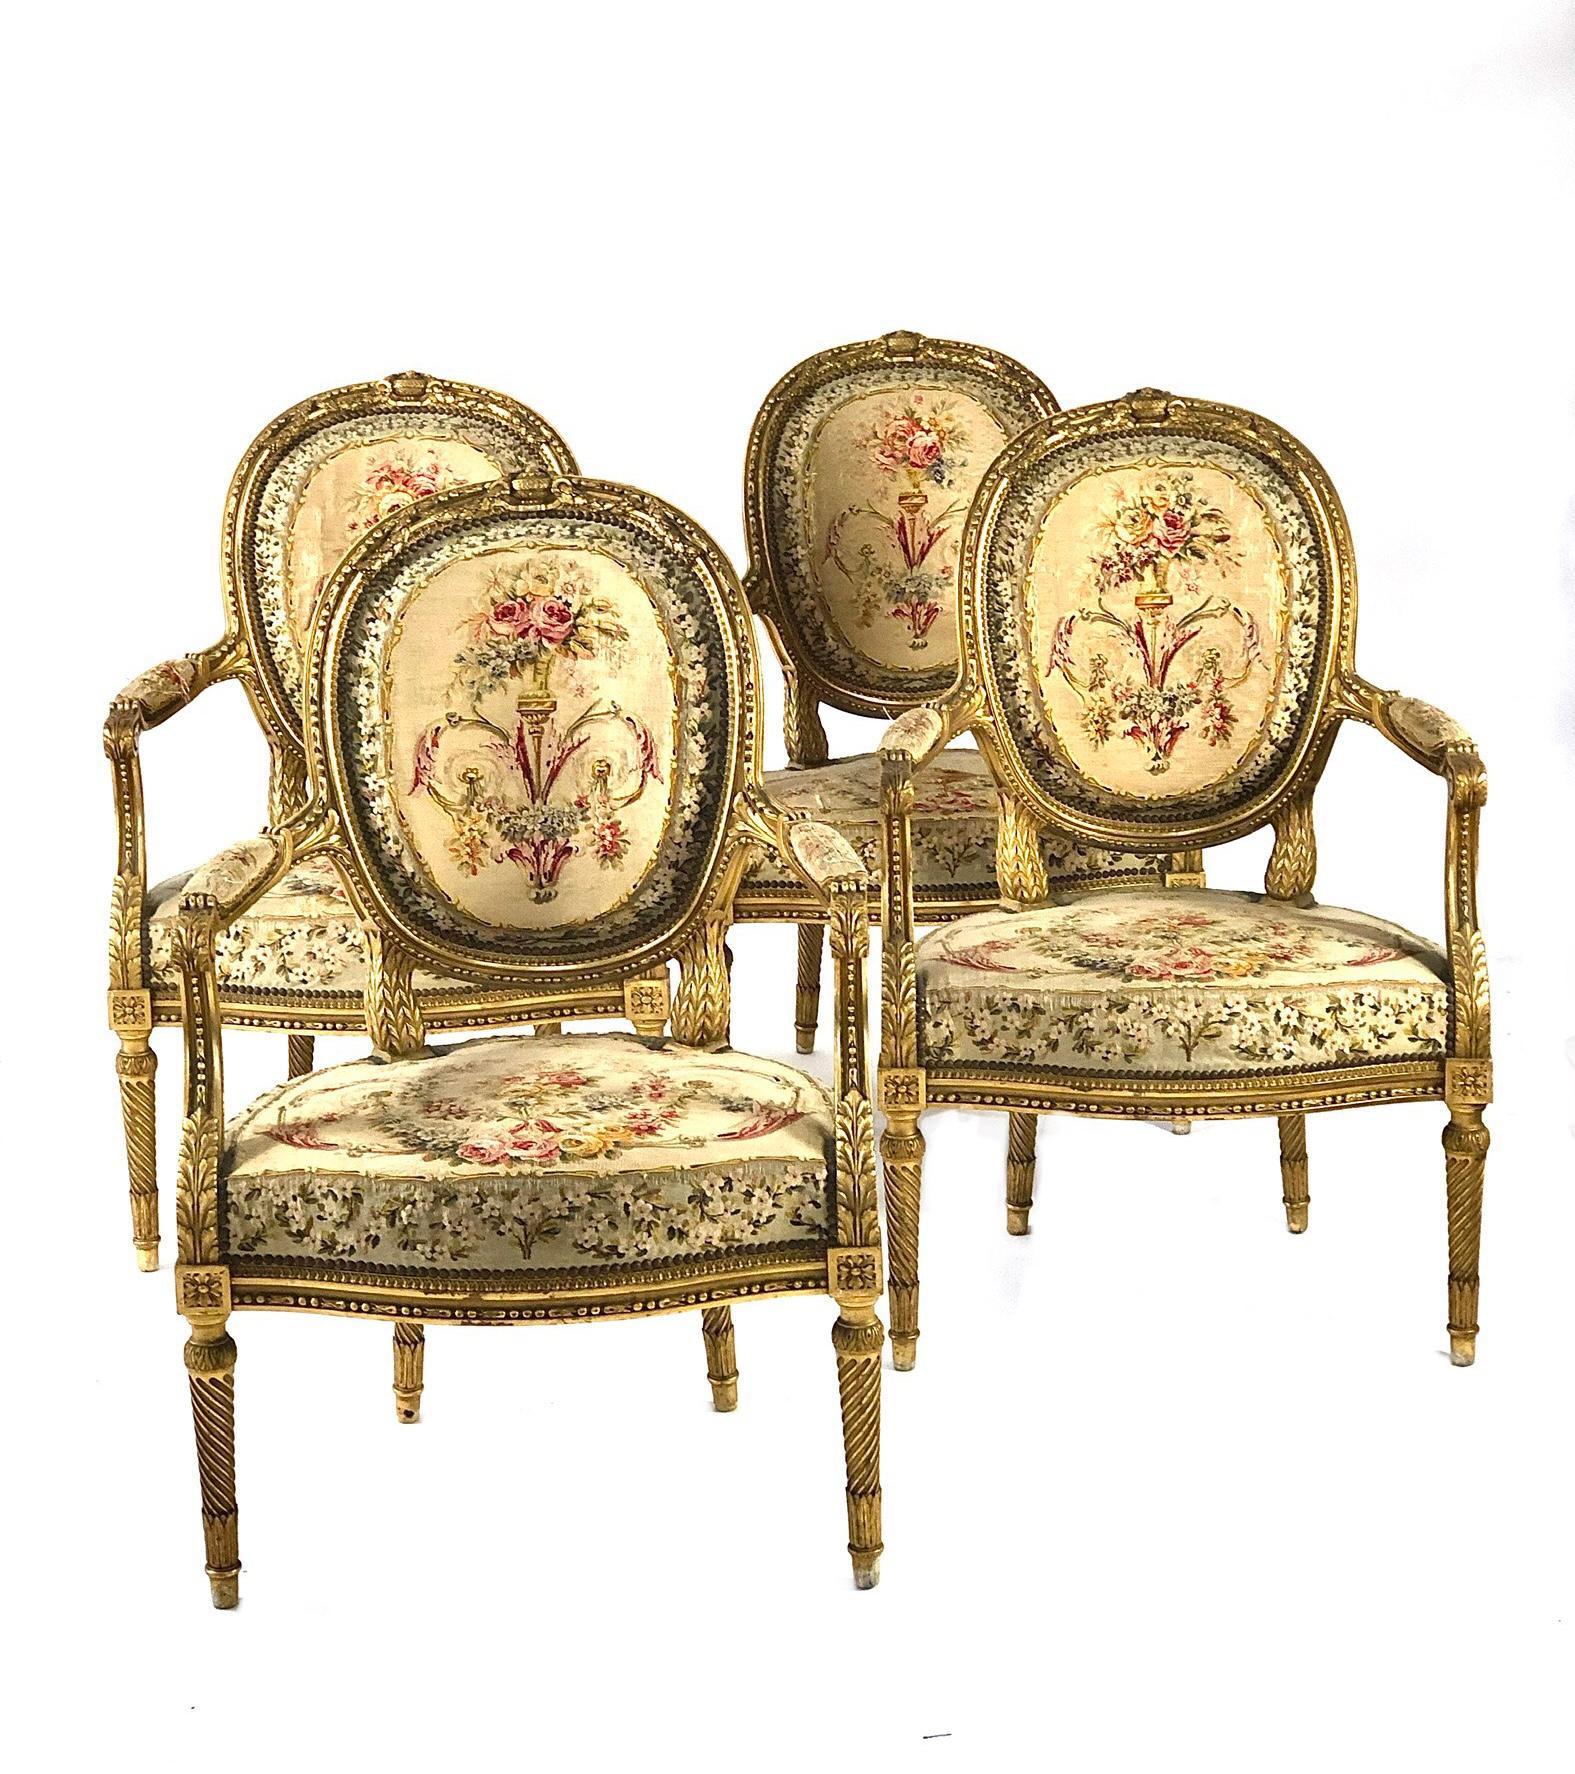 An exquisite suite of giltwood living room furniture in the Louis XVI style, comprising a two-seater sofa and four matching armchairs. Elegantly carved and upholstered, this fine set exhibits richly carved motifs throughout, as well as attractively